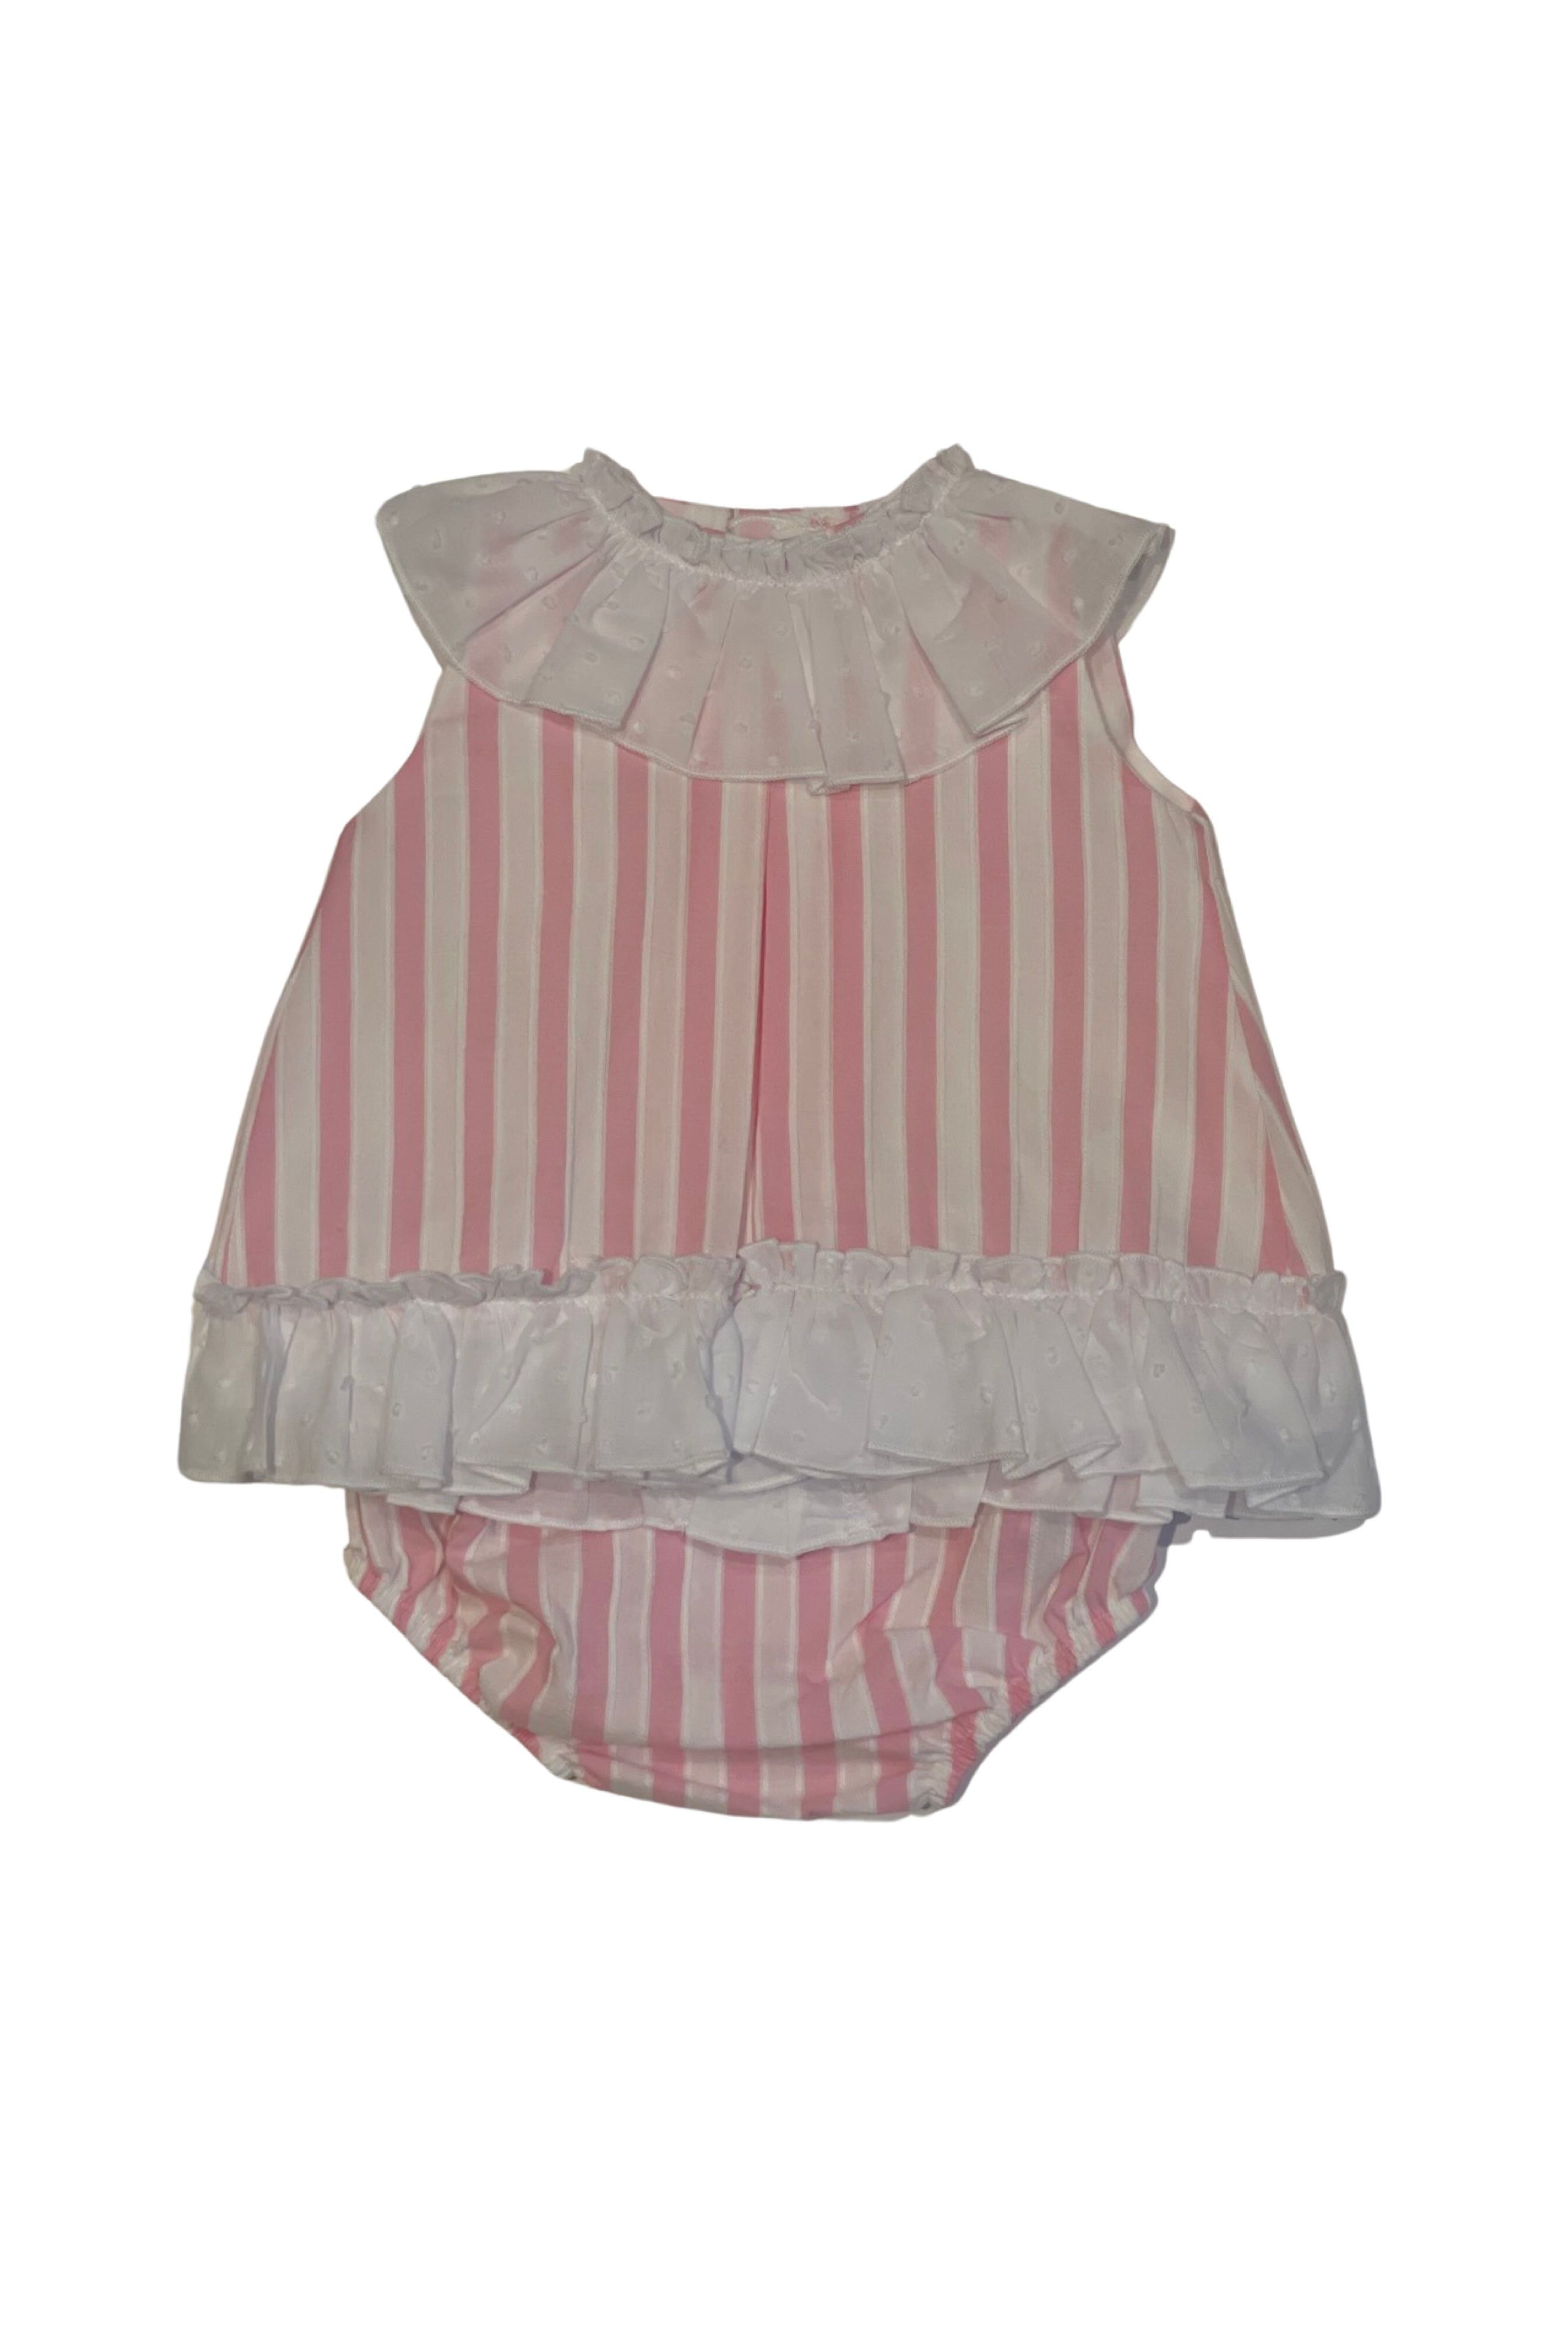 SS24 Lor Miral Baby Girls Pink Stripe Dress & Knickers Dainty Delilah